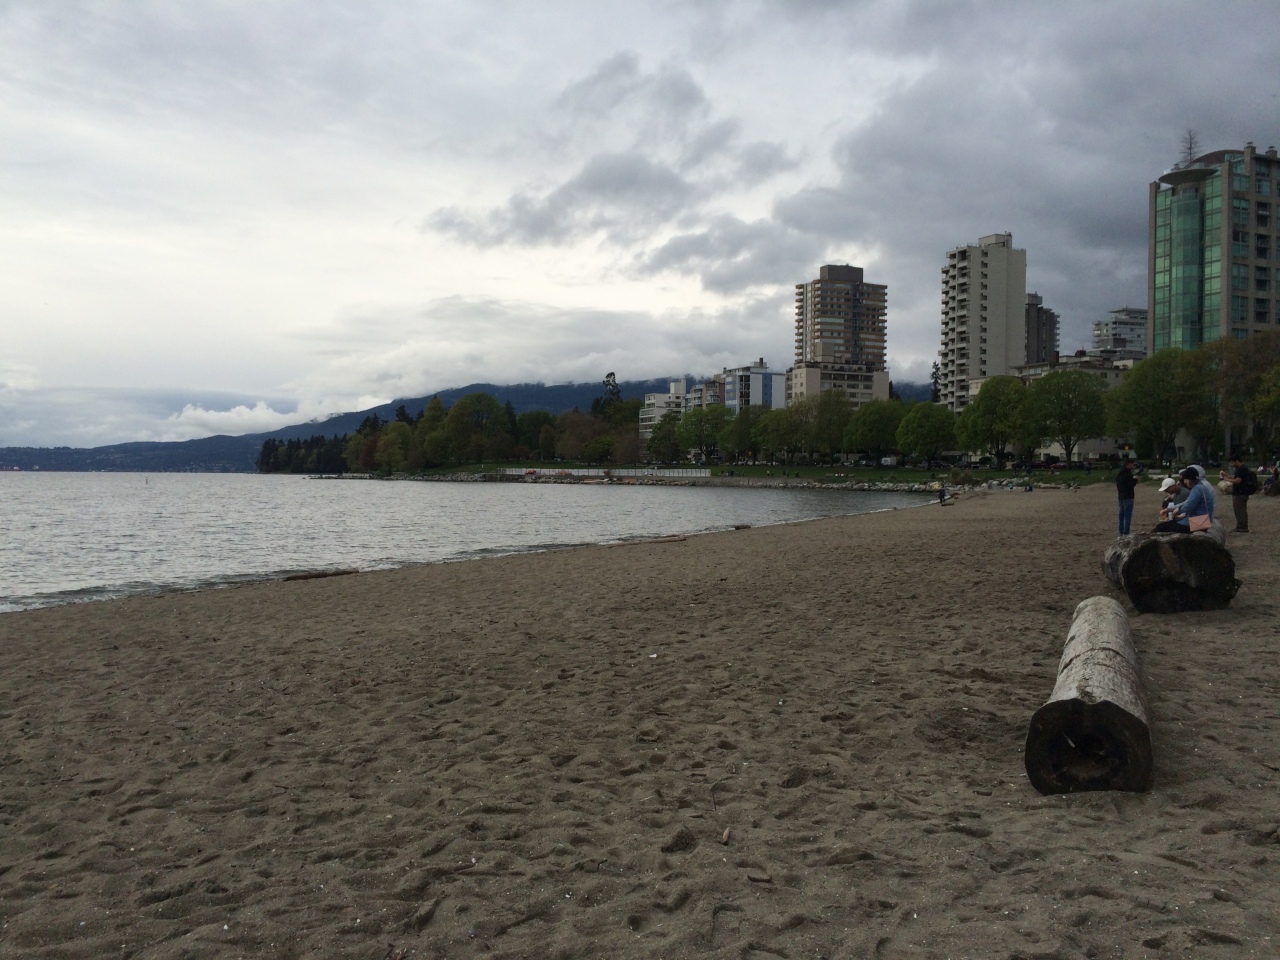 April in the Pacific Northwest, or, a beachfront park in Vancouver